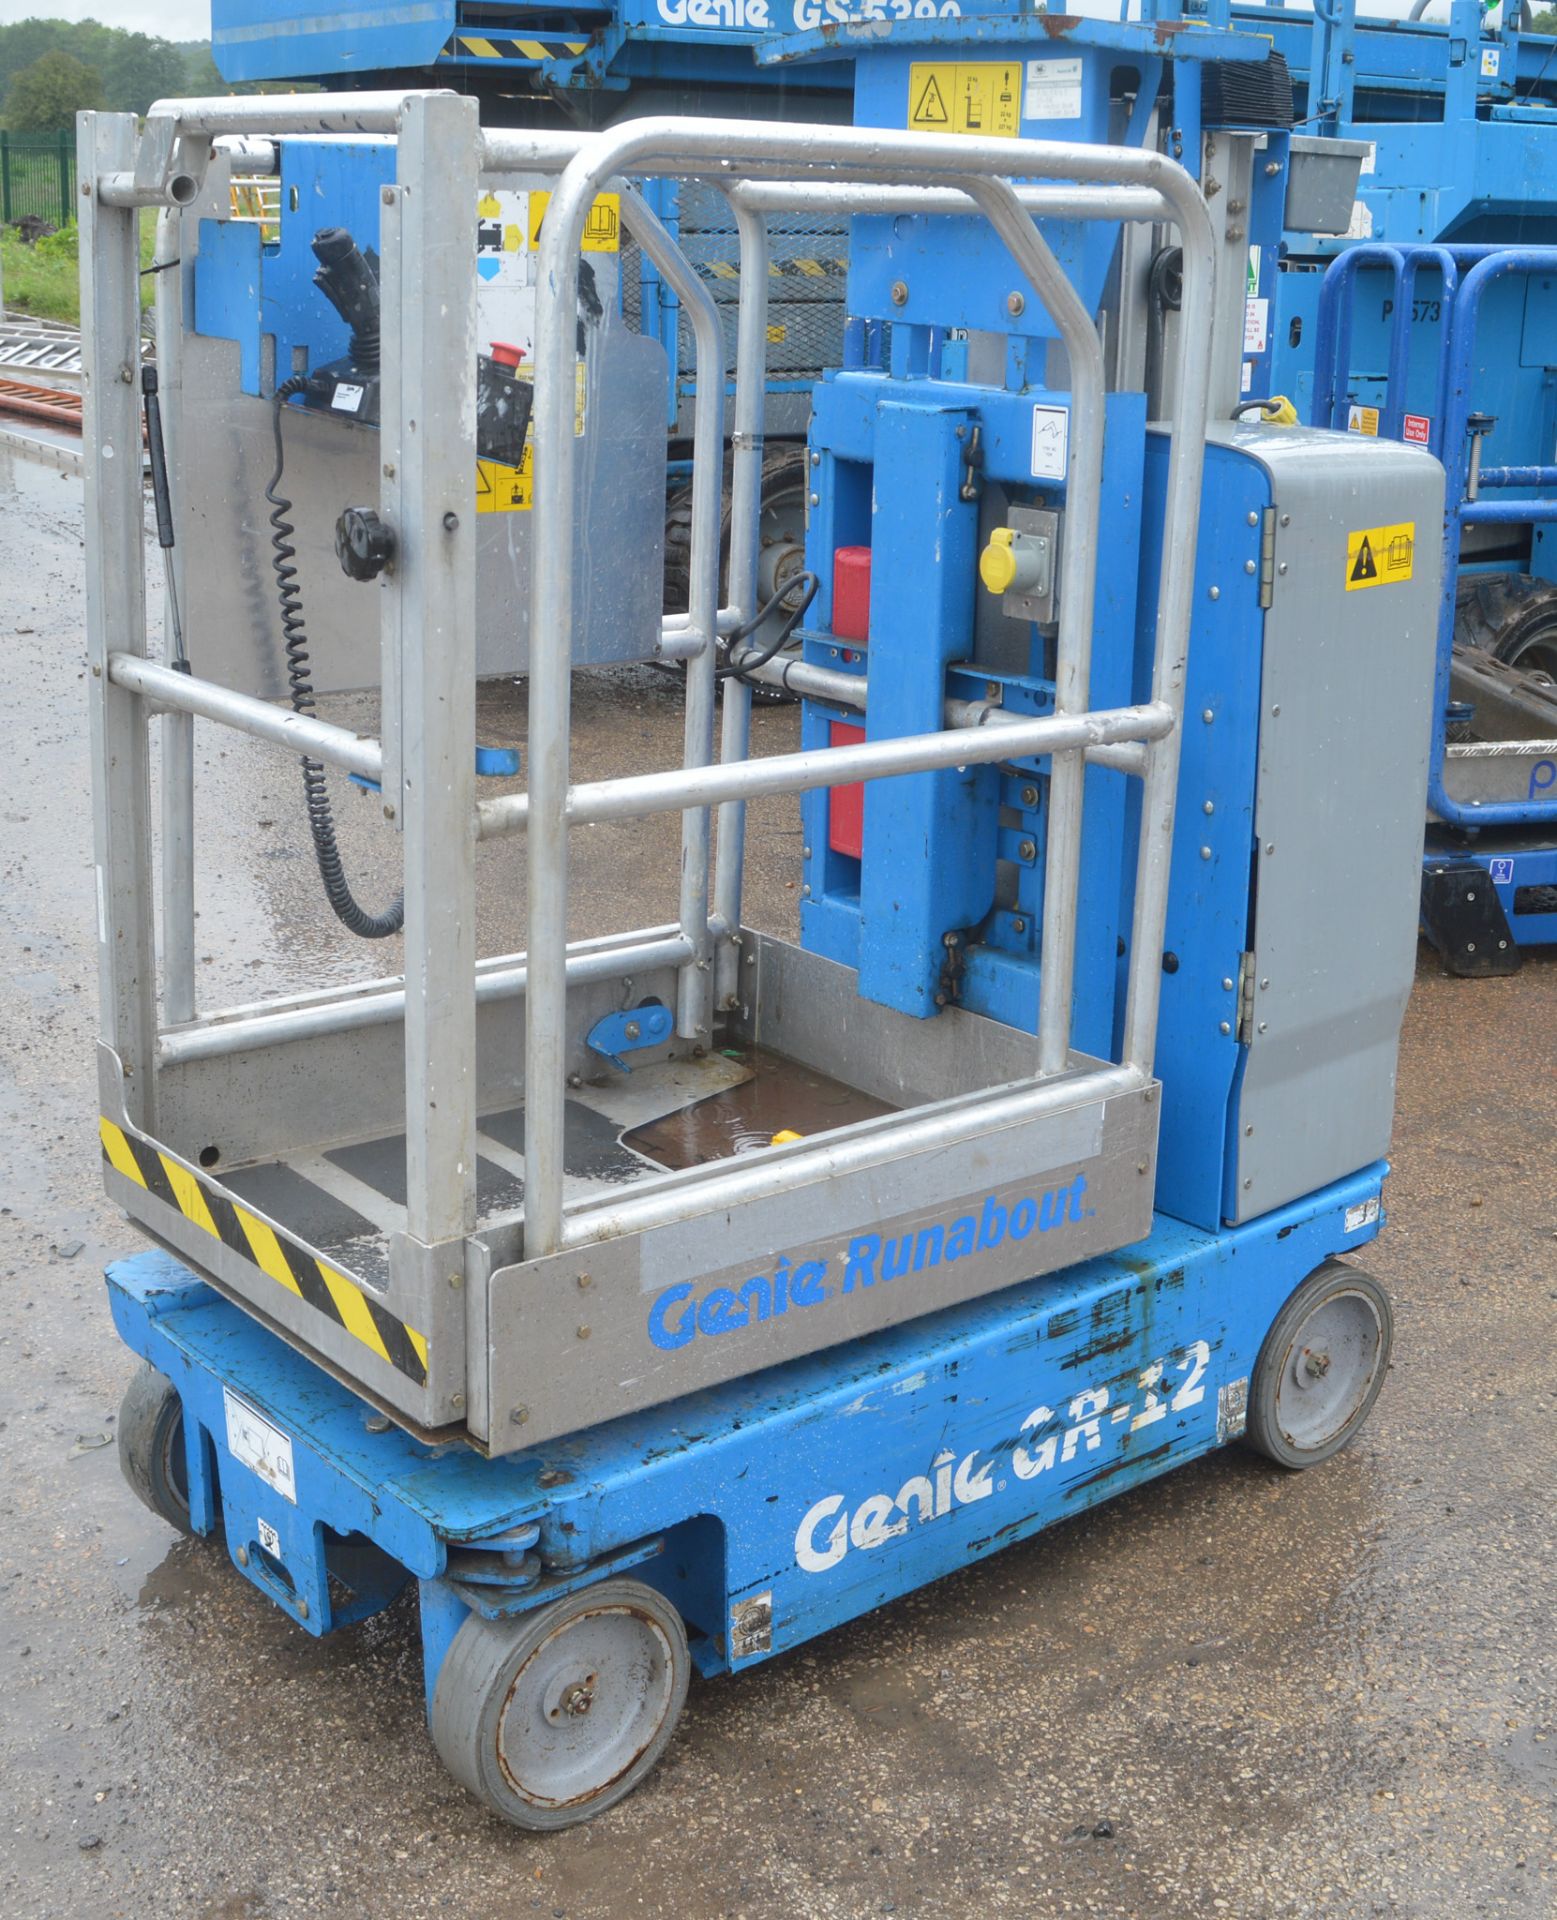 Genie Runabout GR-12 battery electric scissor lift  Year: 2013 S/N: 26579 A608642